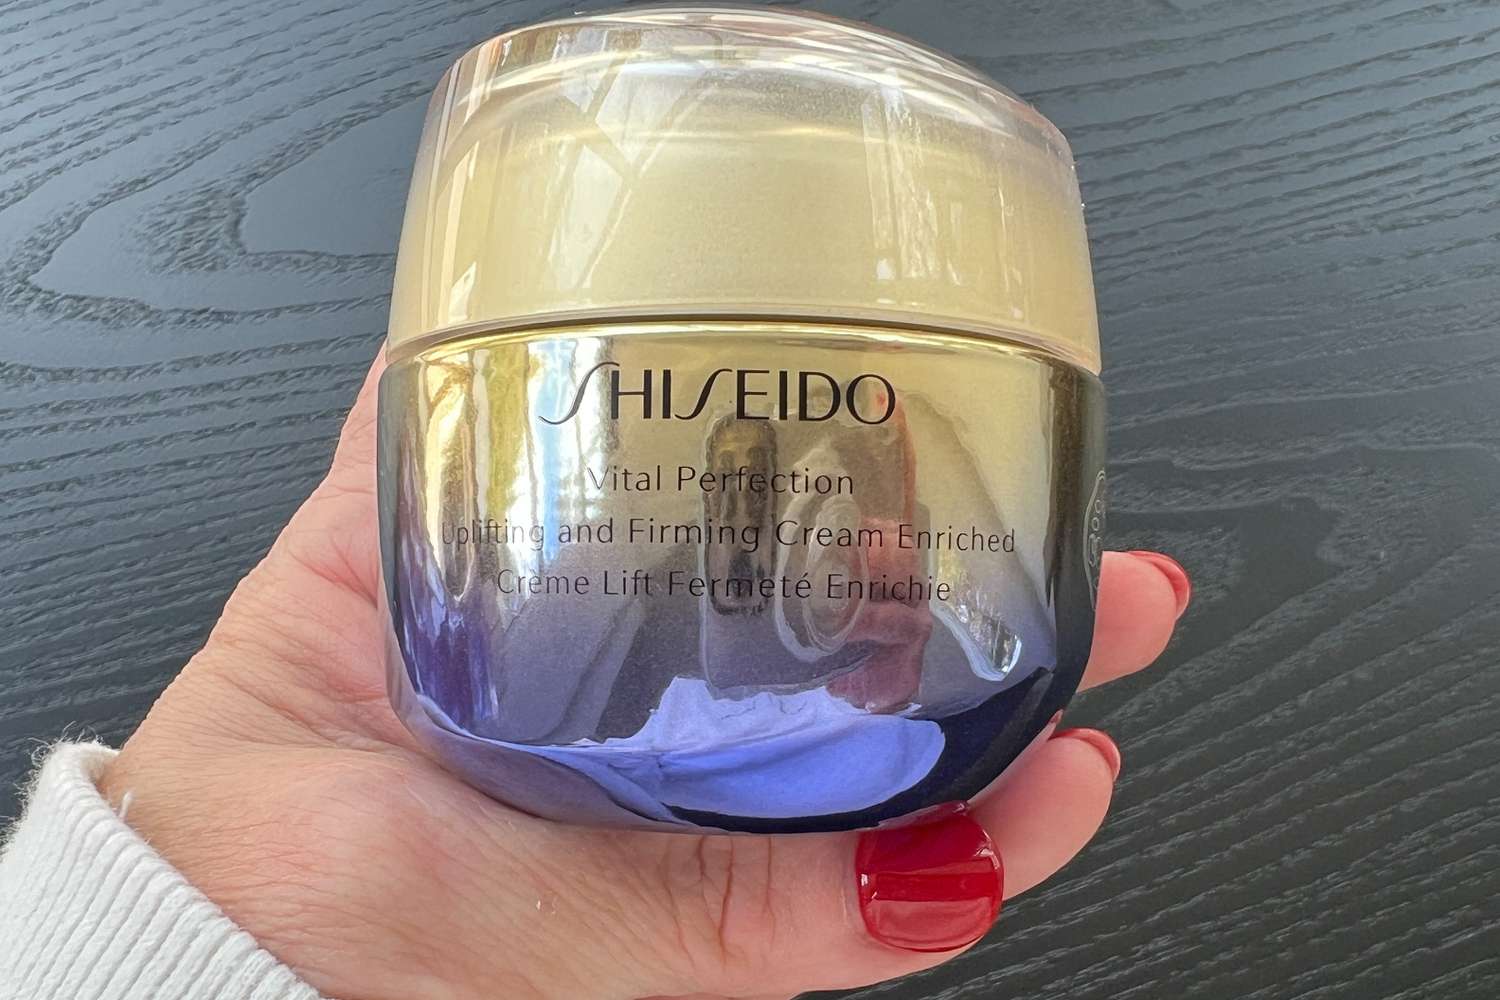 A jar of Shiseido Vital Perfection Uplifting and Firming Cream